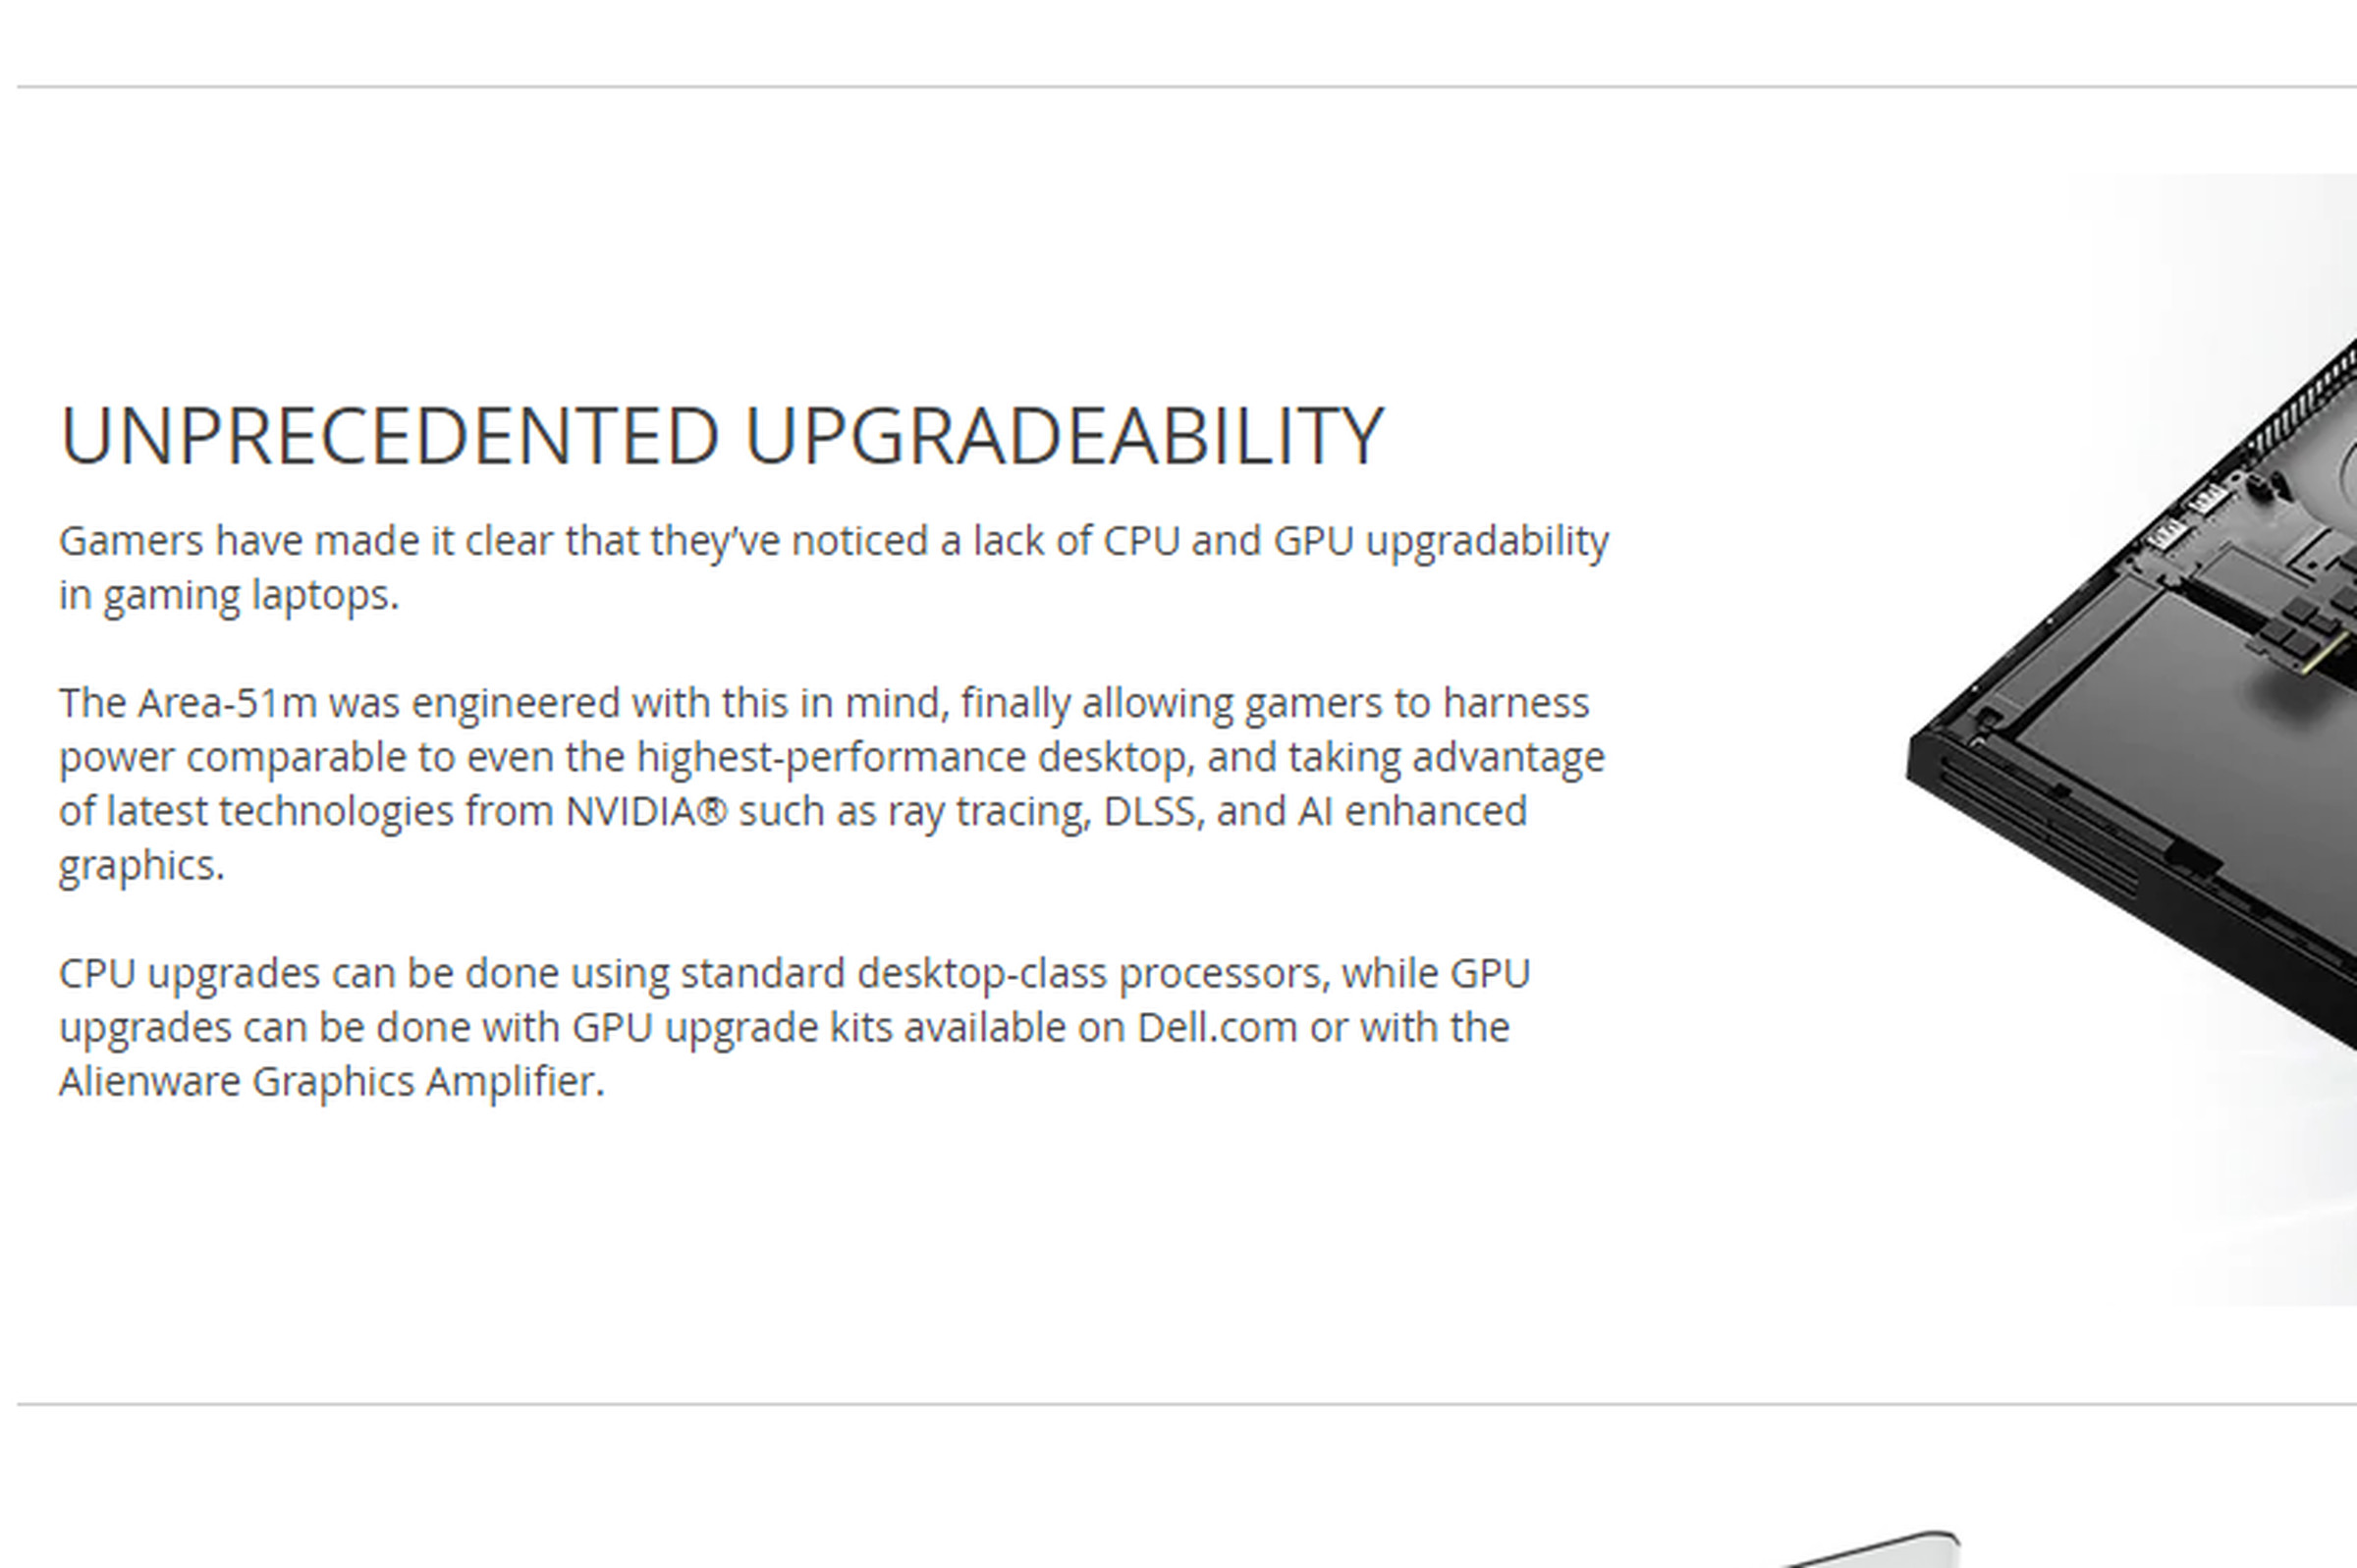 Dell’s marketing promised “unprecedented upgradeability” for the laptop. 